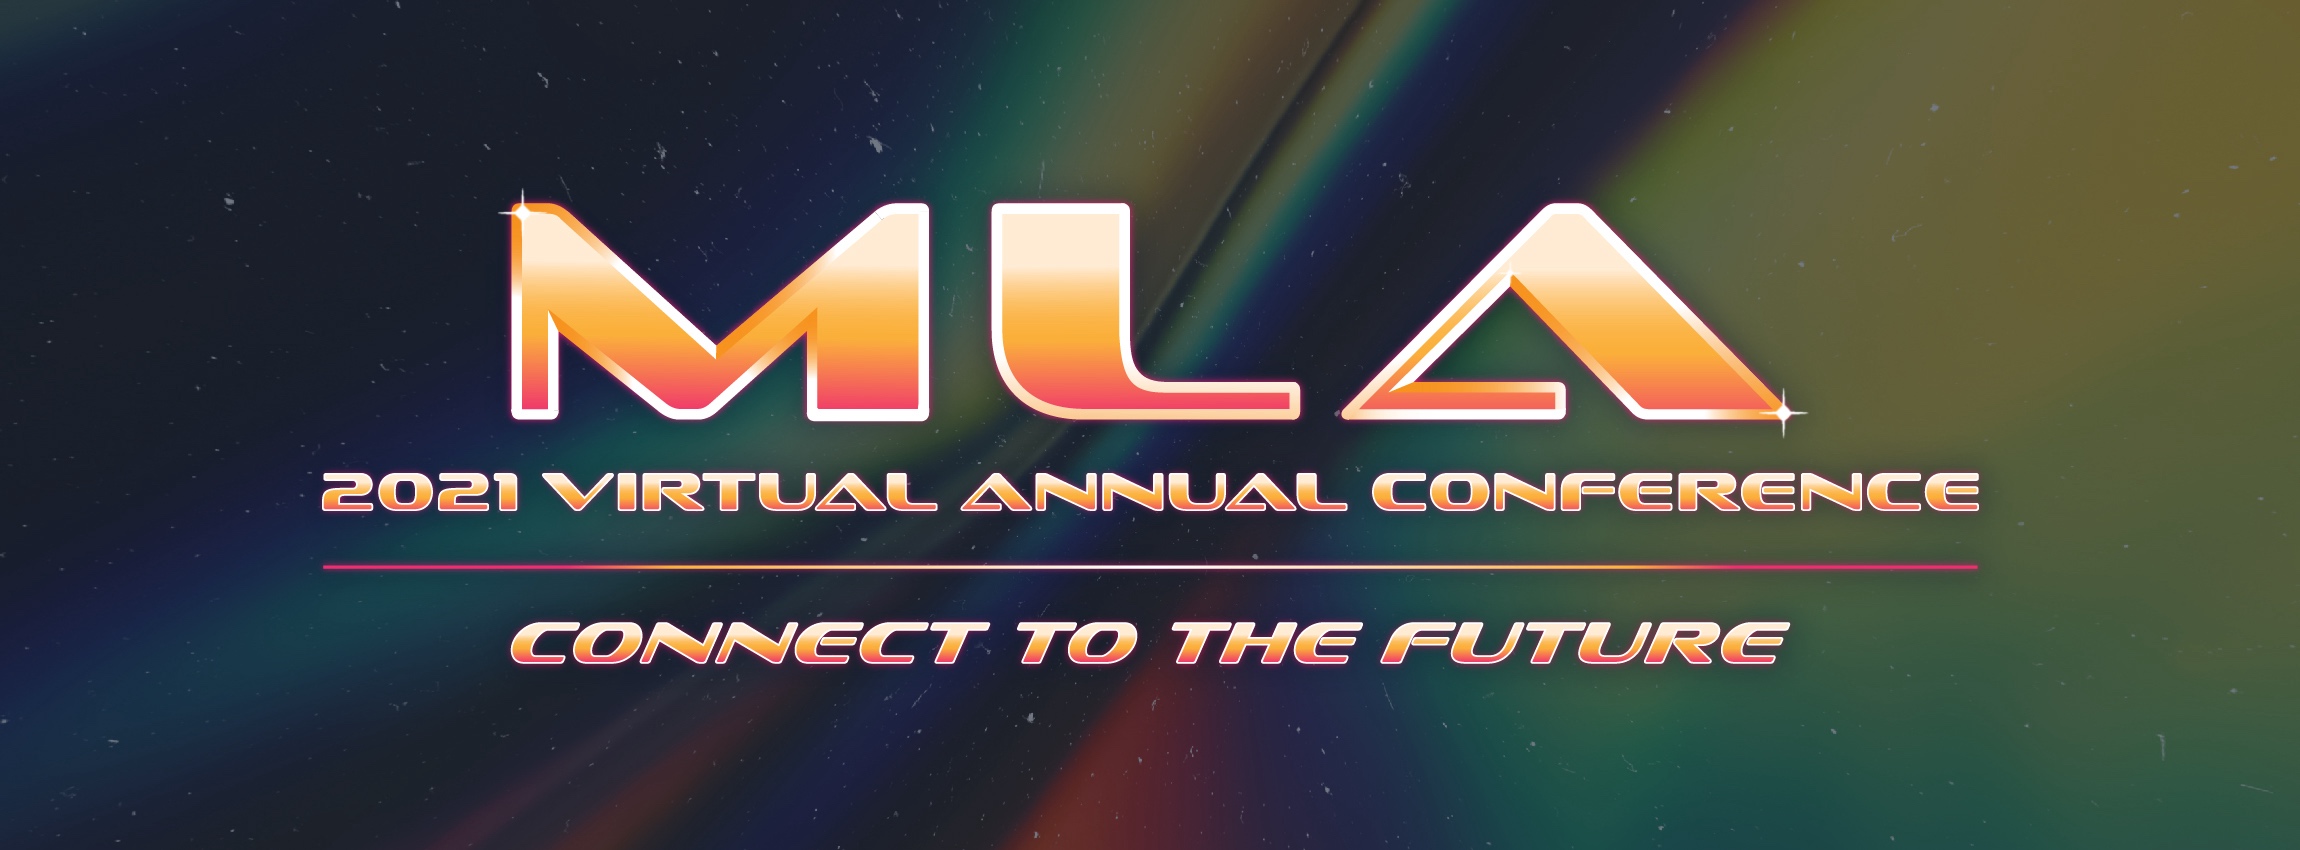 MLA 2021 Virtual Conference Archives